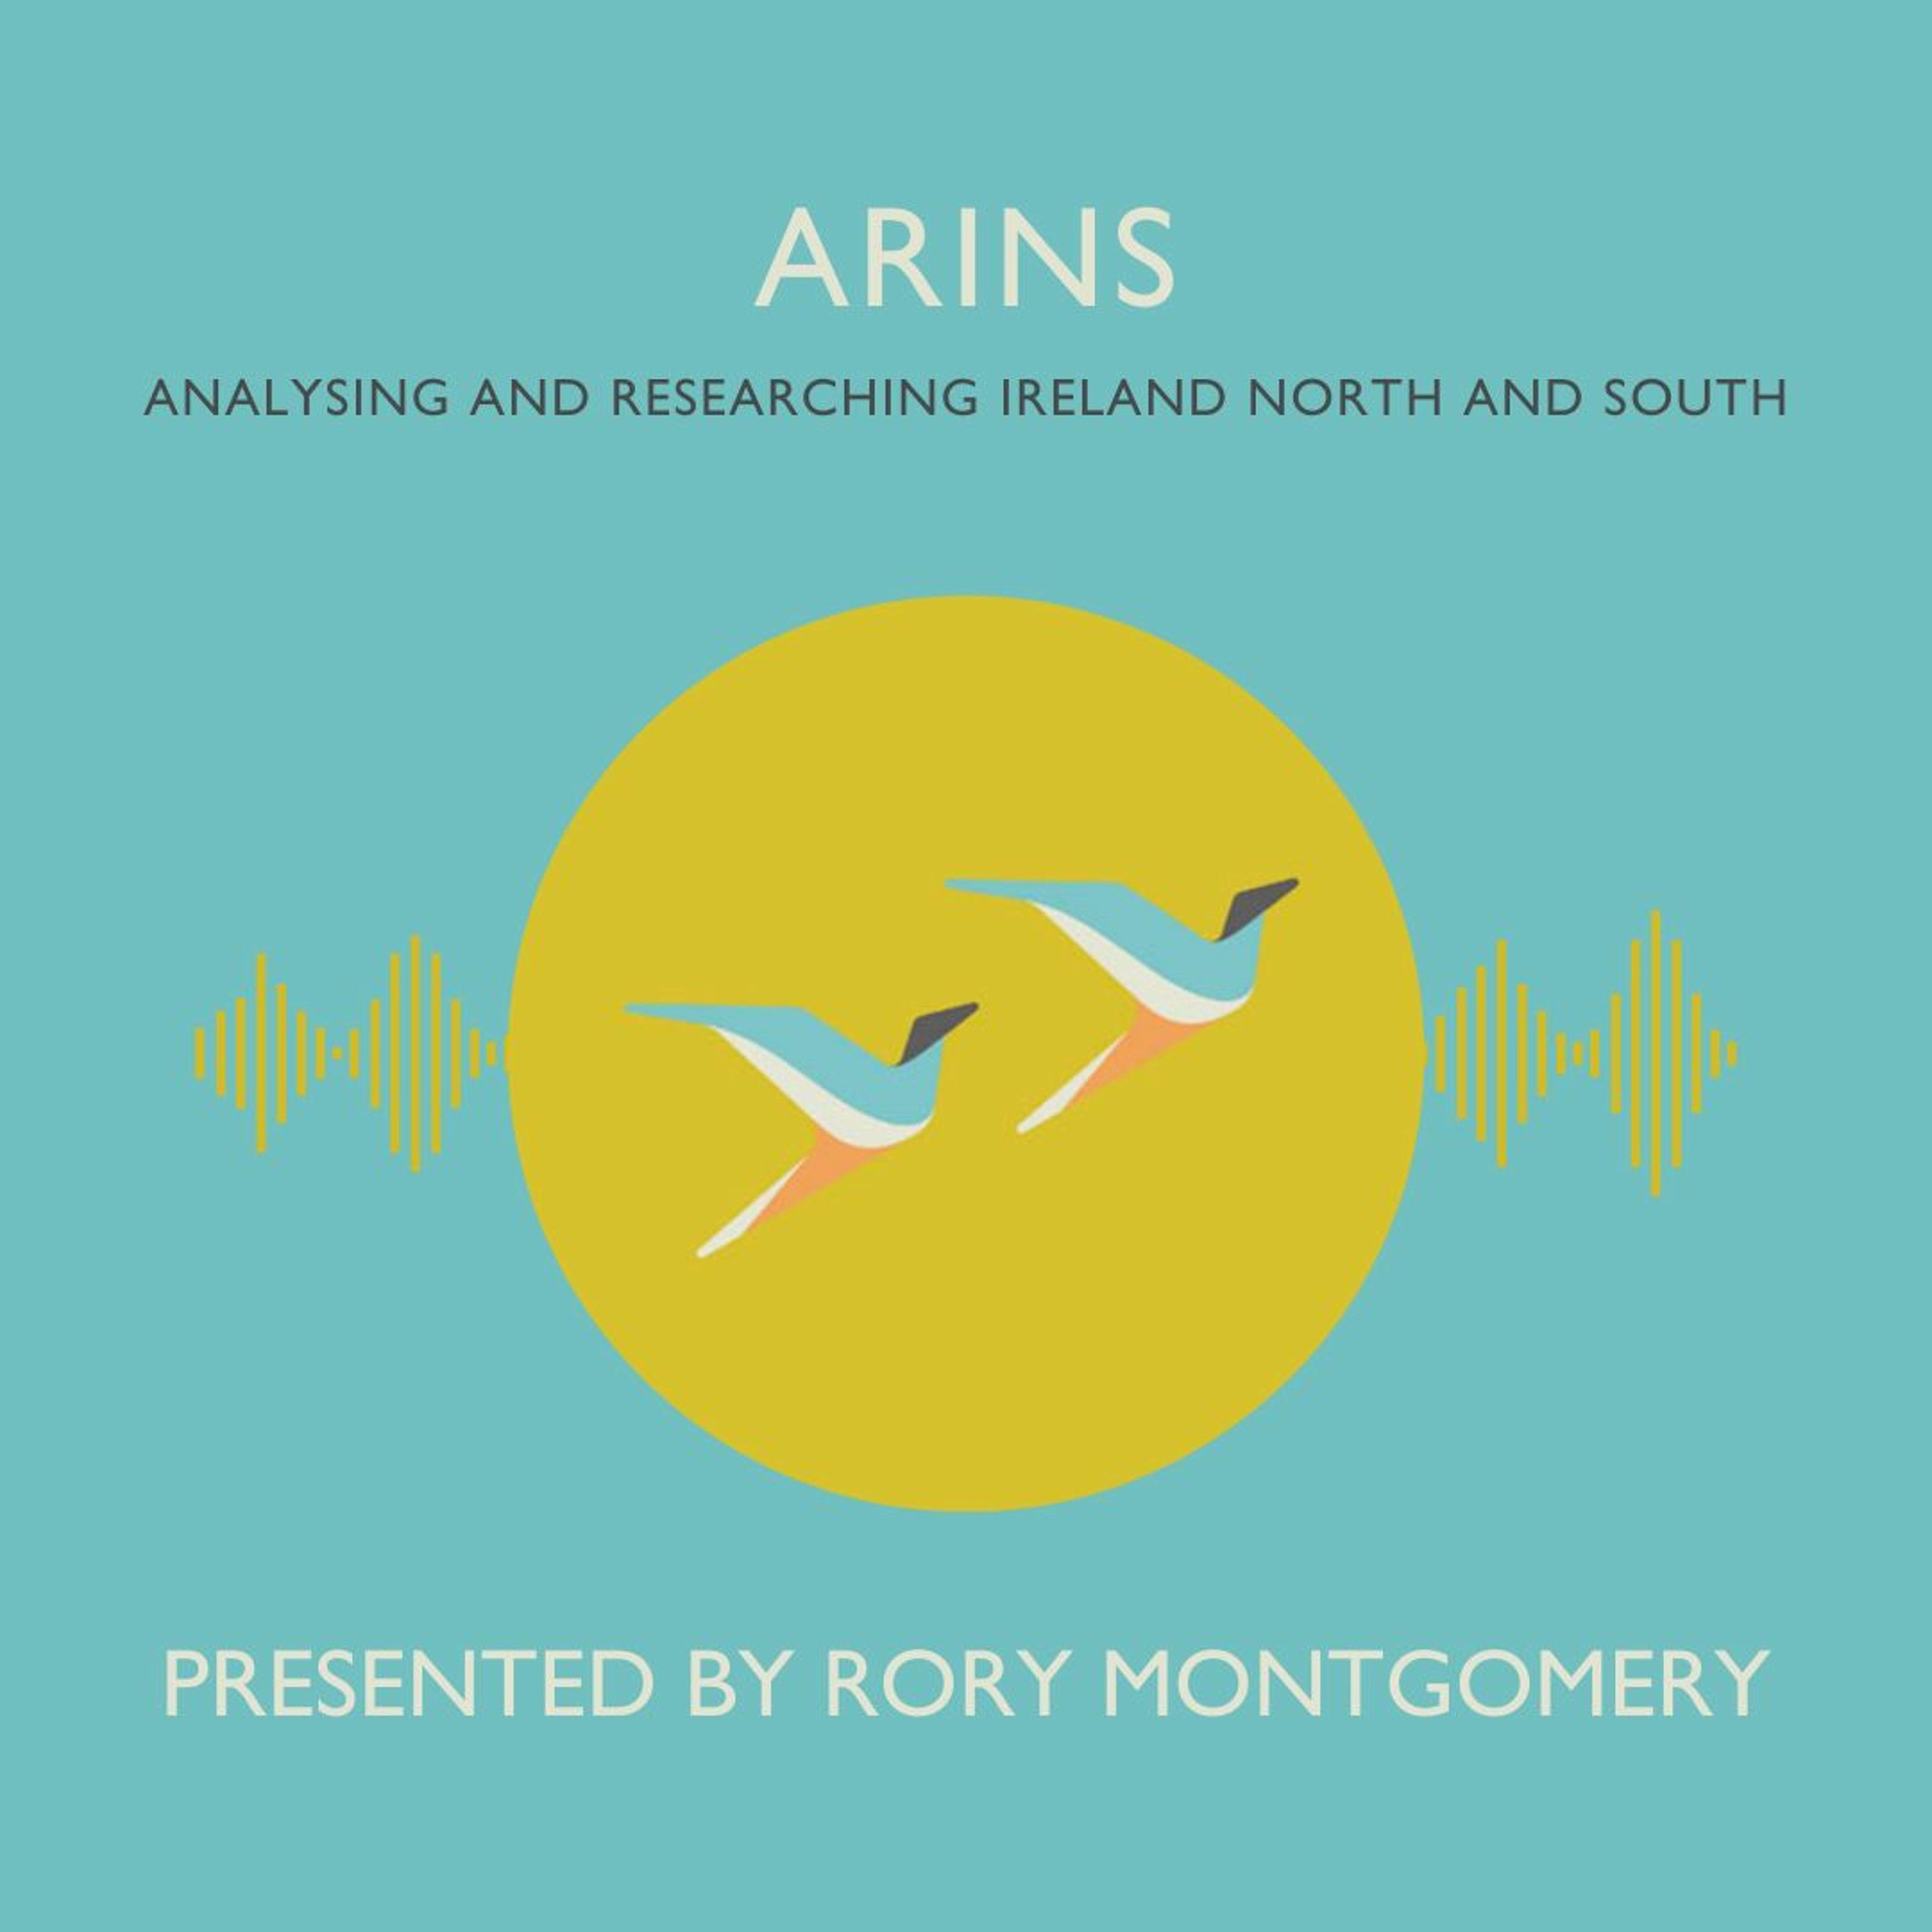 ARINS What are the benefits of cross-border cooperation in the arts?